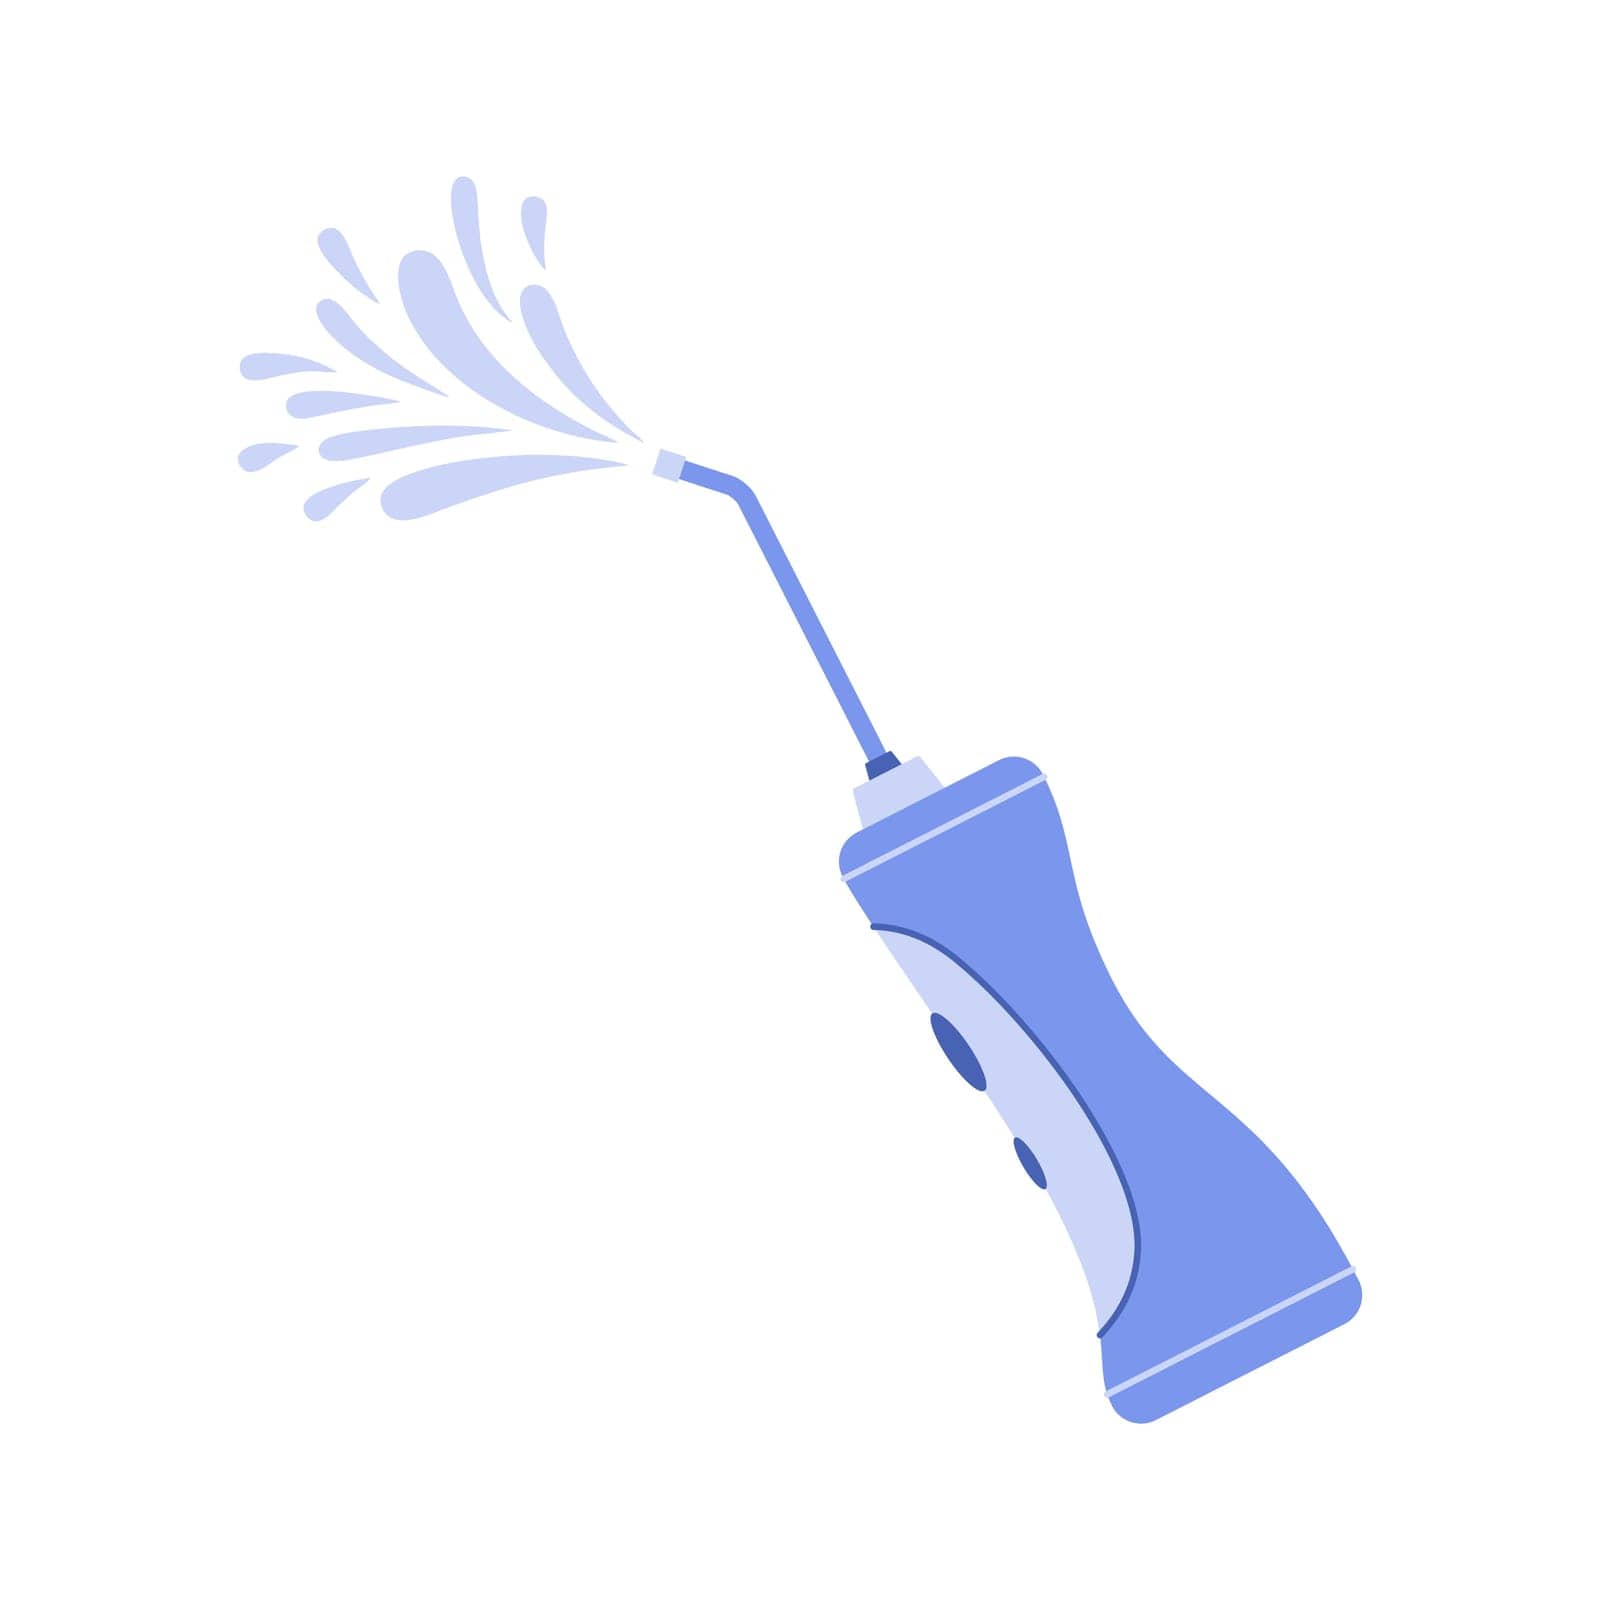 Dental irrigator with water spray for oral hygiene and teeth cleaning vector illustration